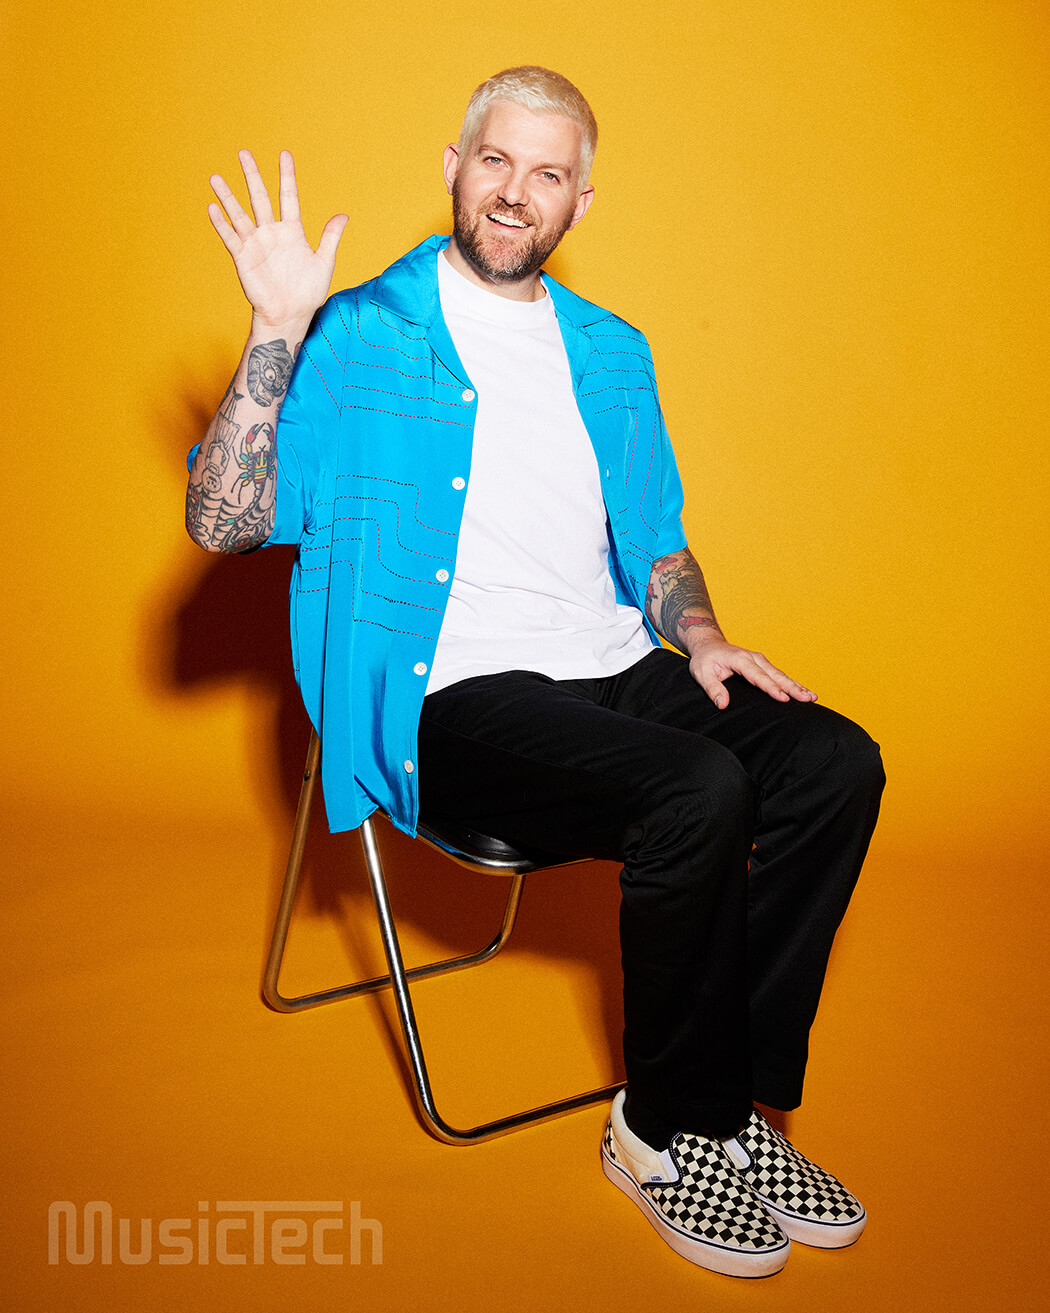 Dillon Francis sitting on a chair and waving, photo by Clare Gillen